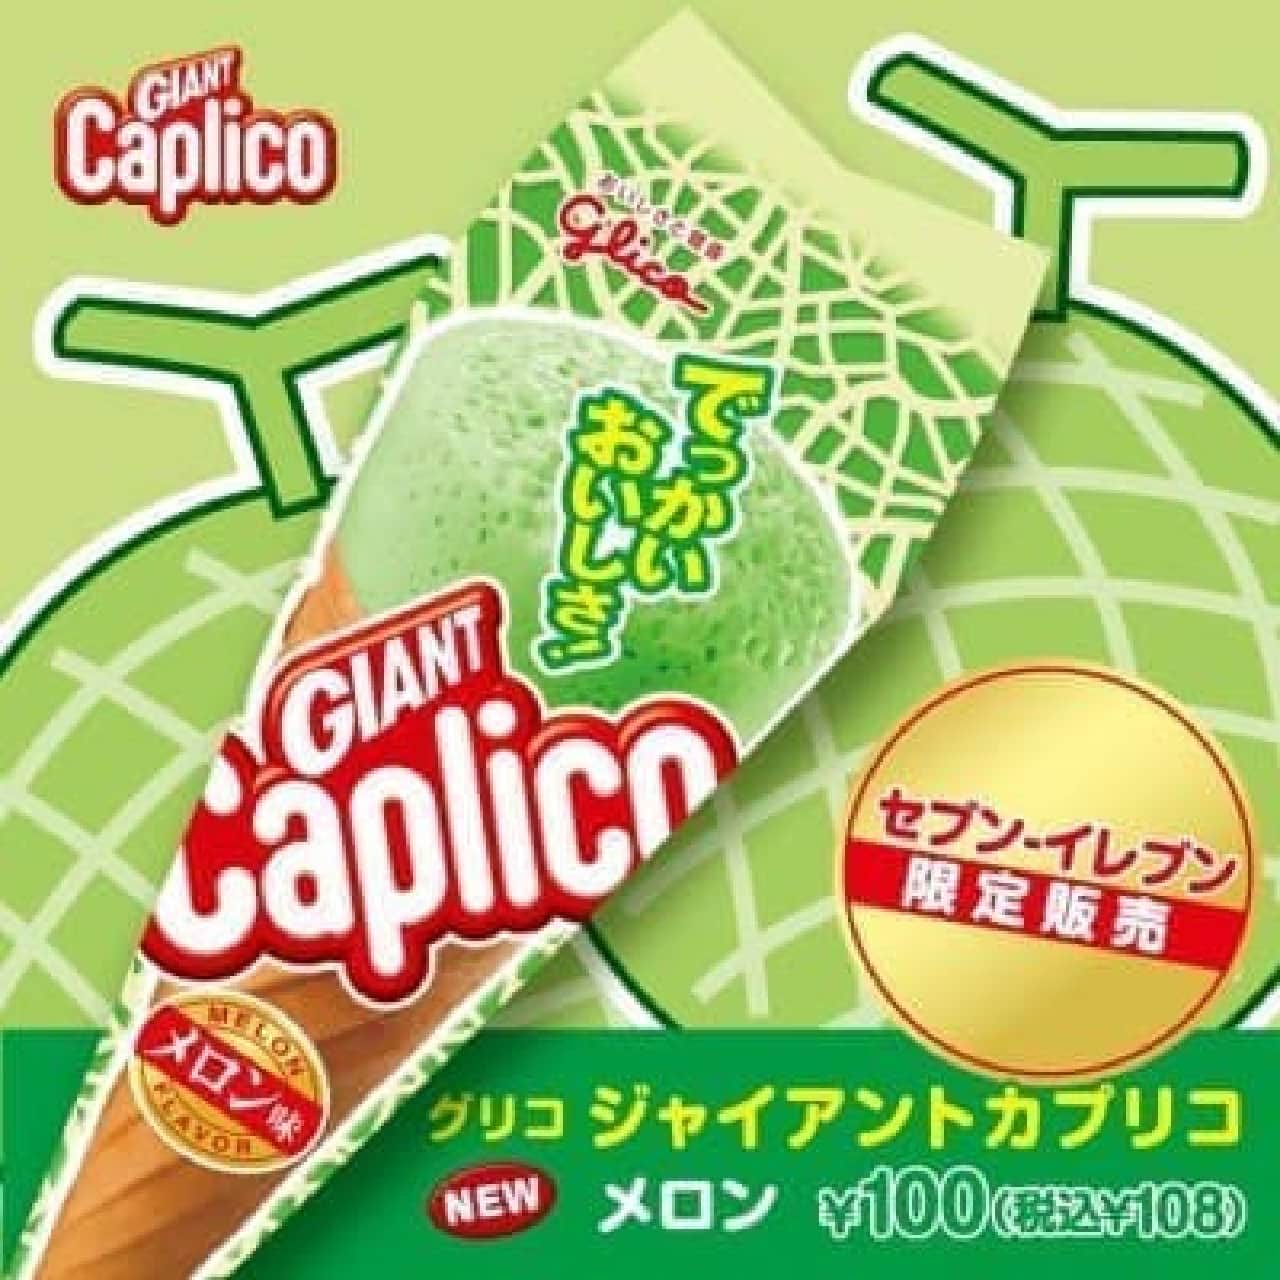 Limited to 7-ELEVEN! Melon-flavored "Caprico" is now available